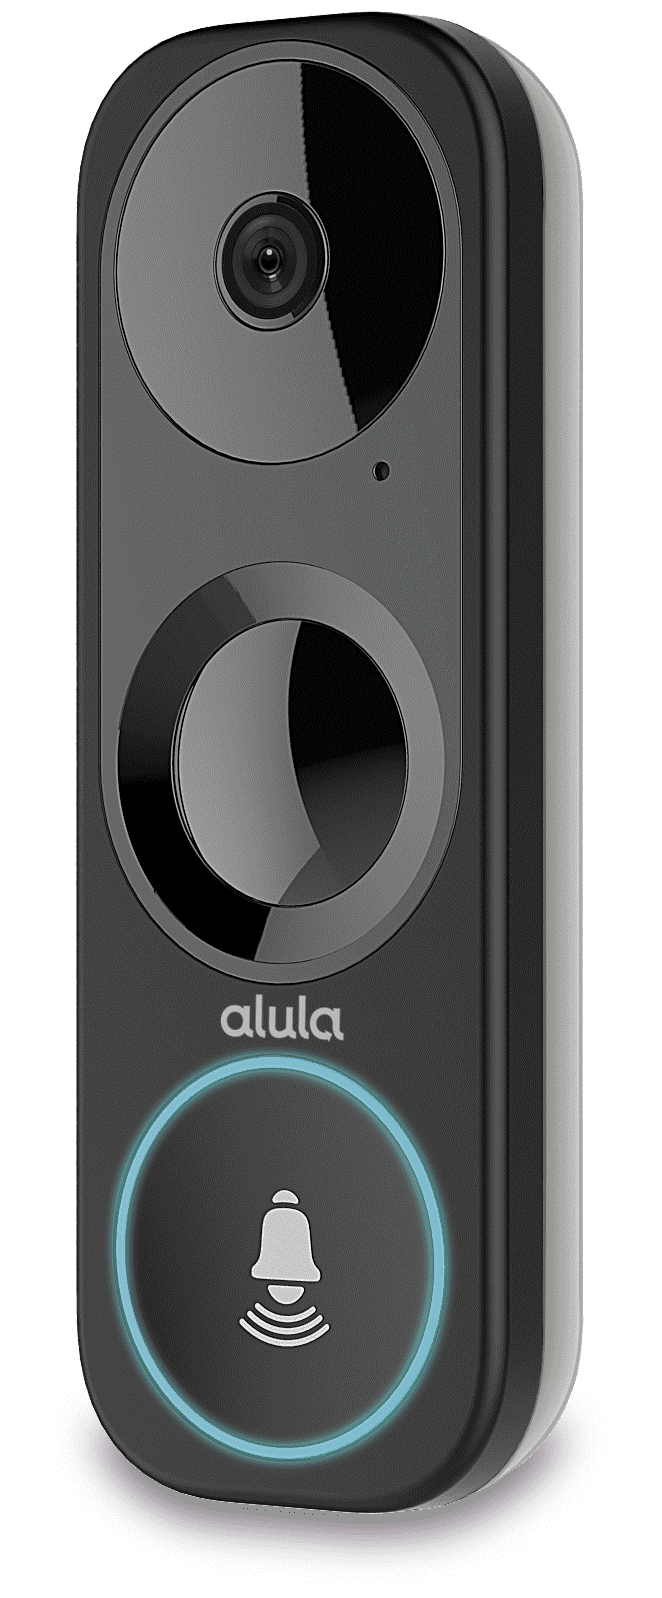 Video doorbells such as this one from Alula is one of two interactive services that pop right to the top in terms of adding value, reducing attrition and increasing RMR for dealers, according to the company.